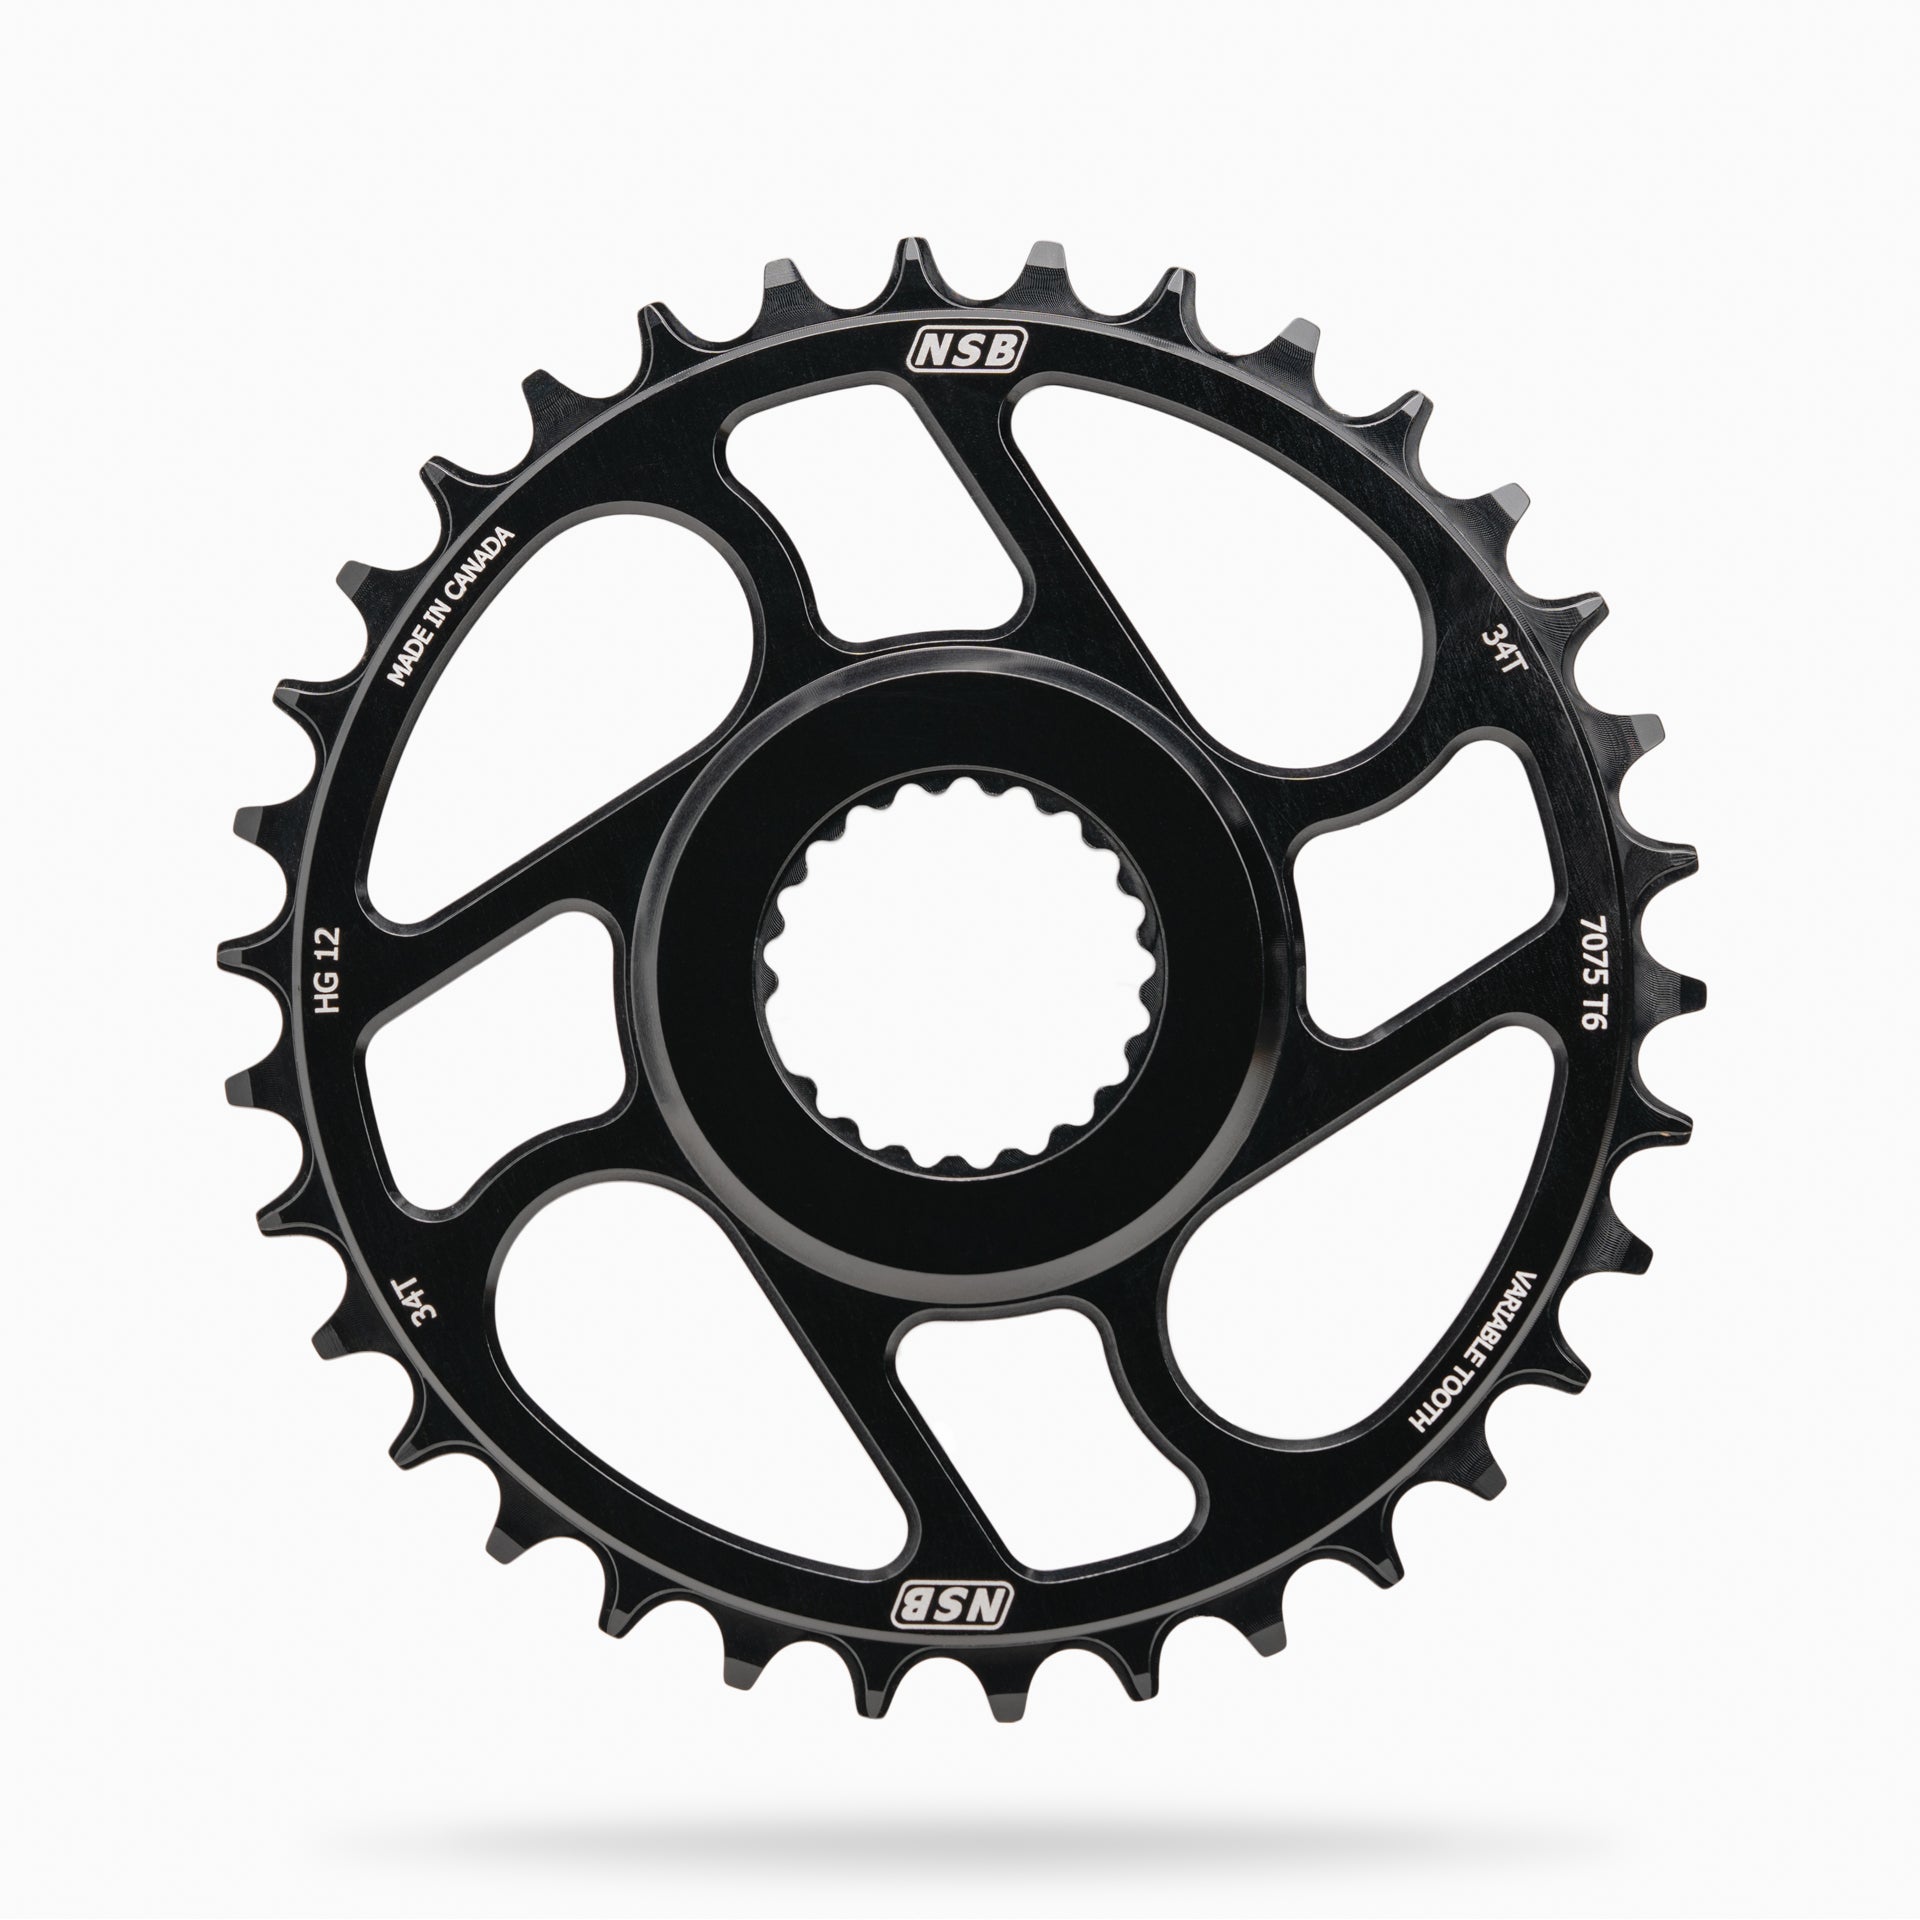 34T Shimano direct mount chainring for 12-speed Shimano drivetrains